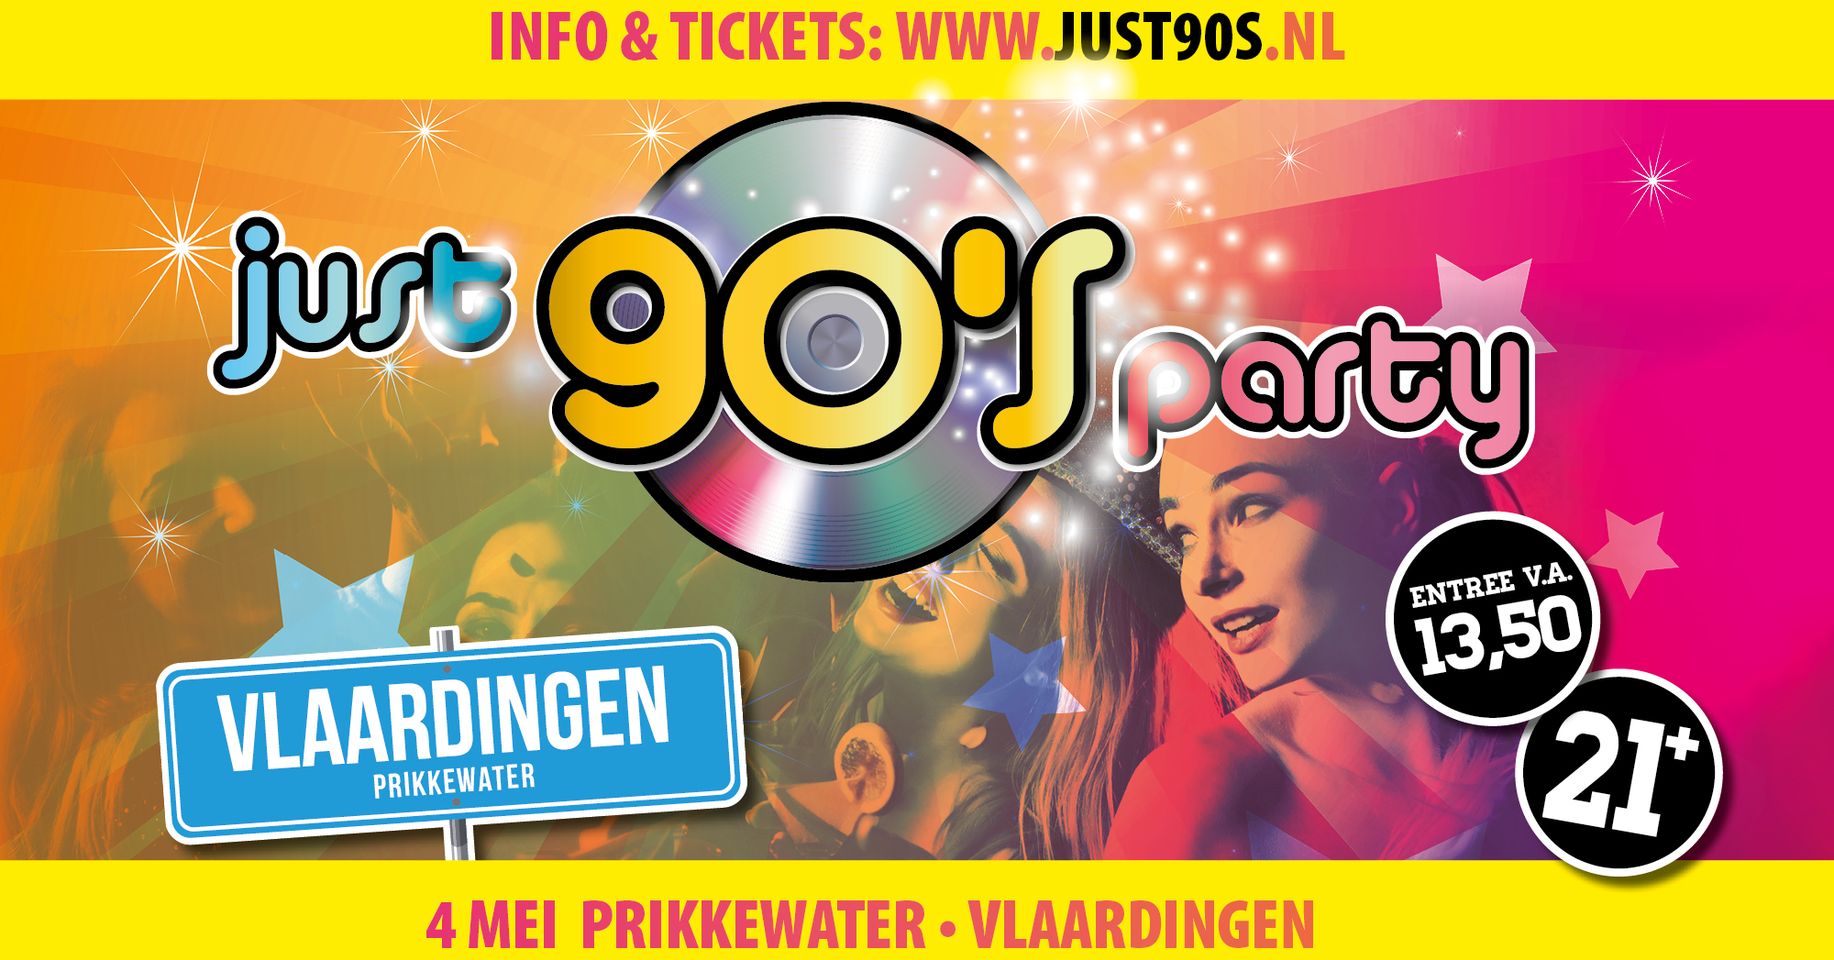 Just 90’s Party